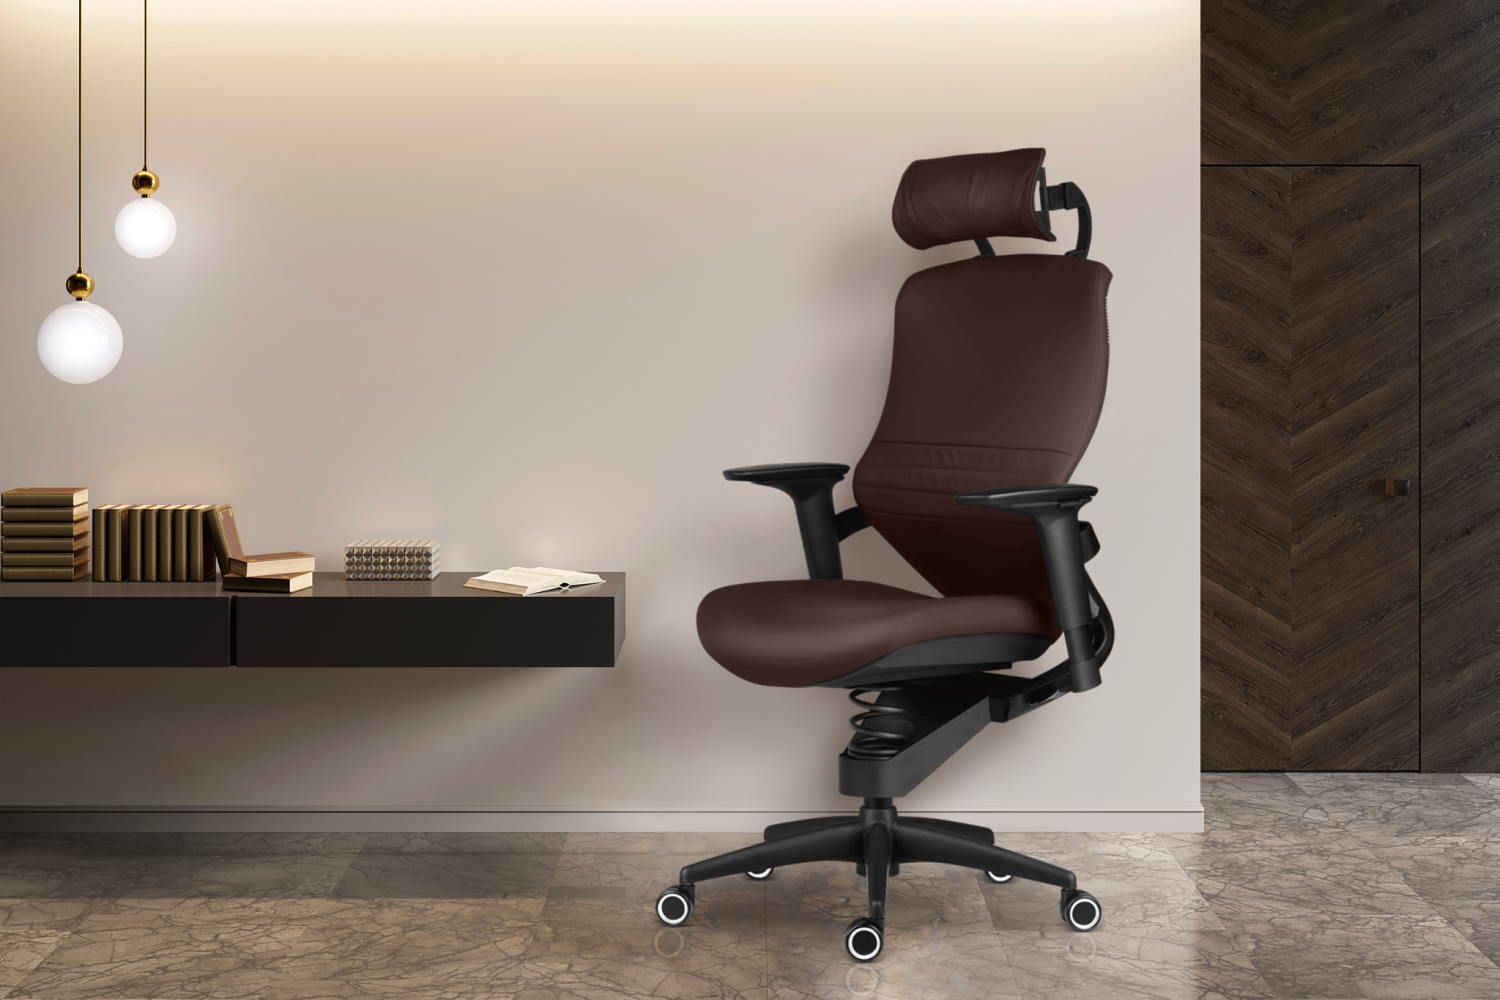 Adaptic STYLE - Stylish therapeutic chair for pain-free sitting